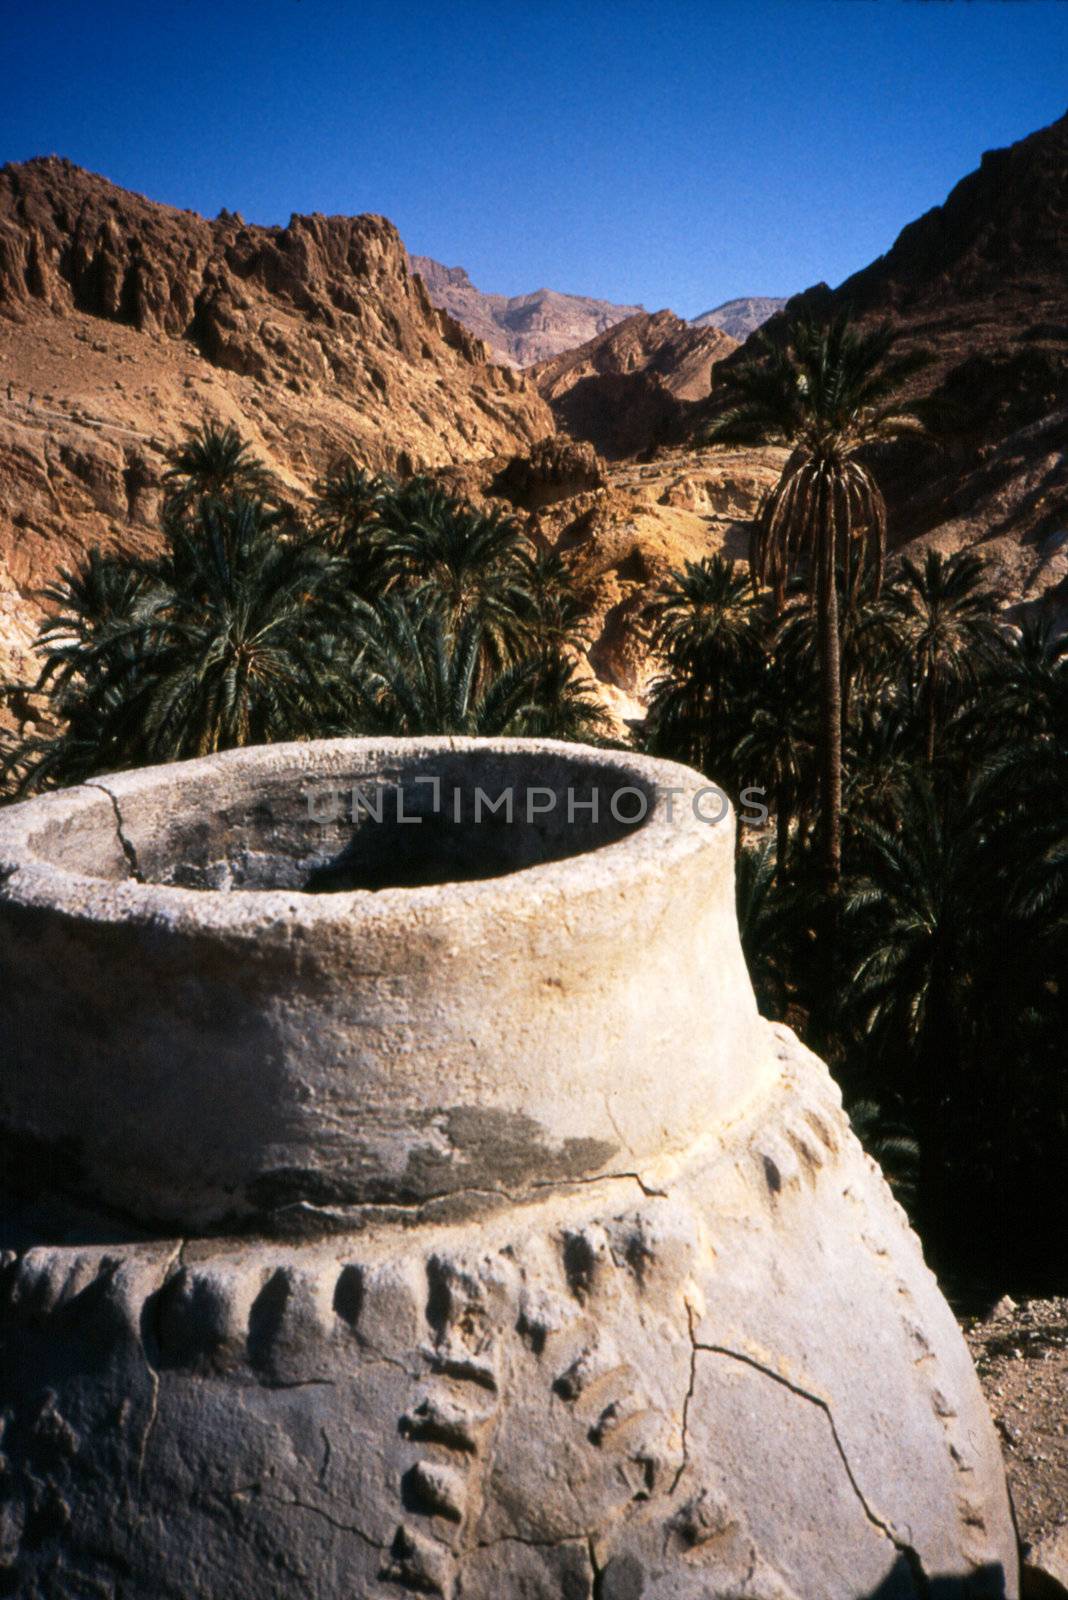 Tunisian vase with desert and mountains in the background